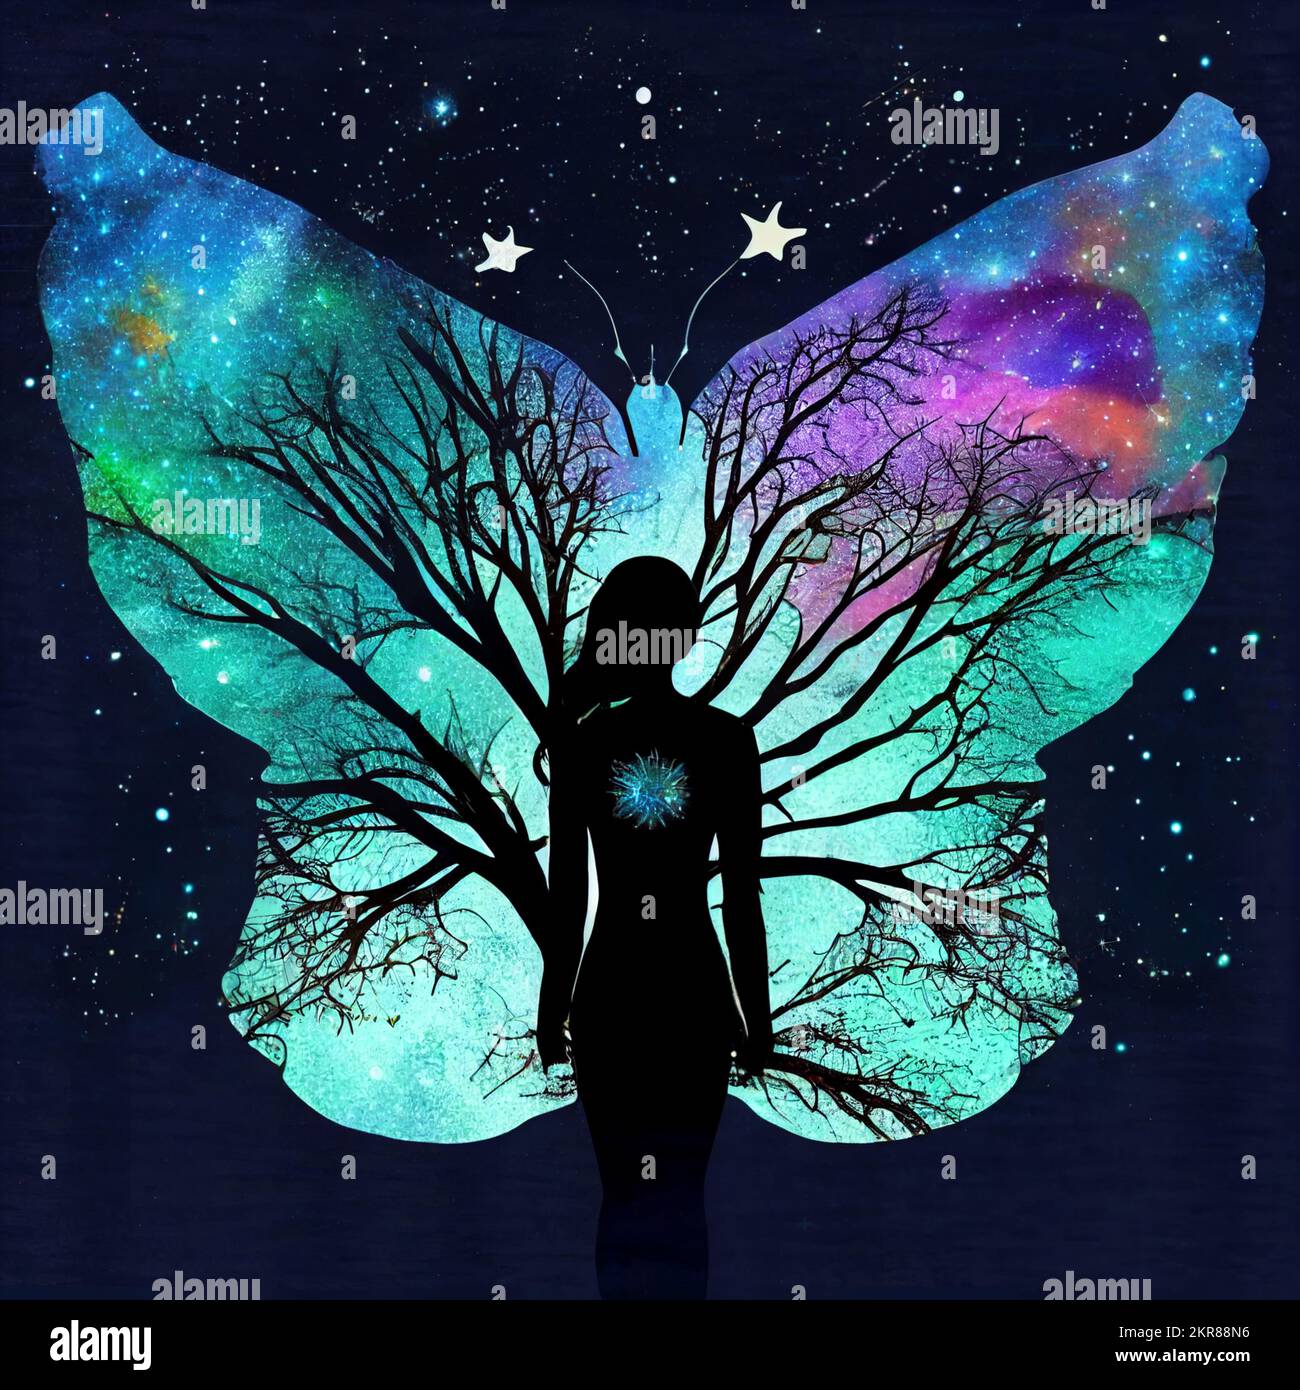 A woman blended with a tree, with fairy wings silhouetted against nebulas and starry skies Stock Photo